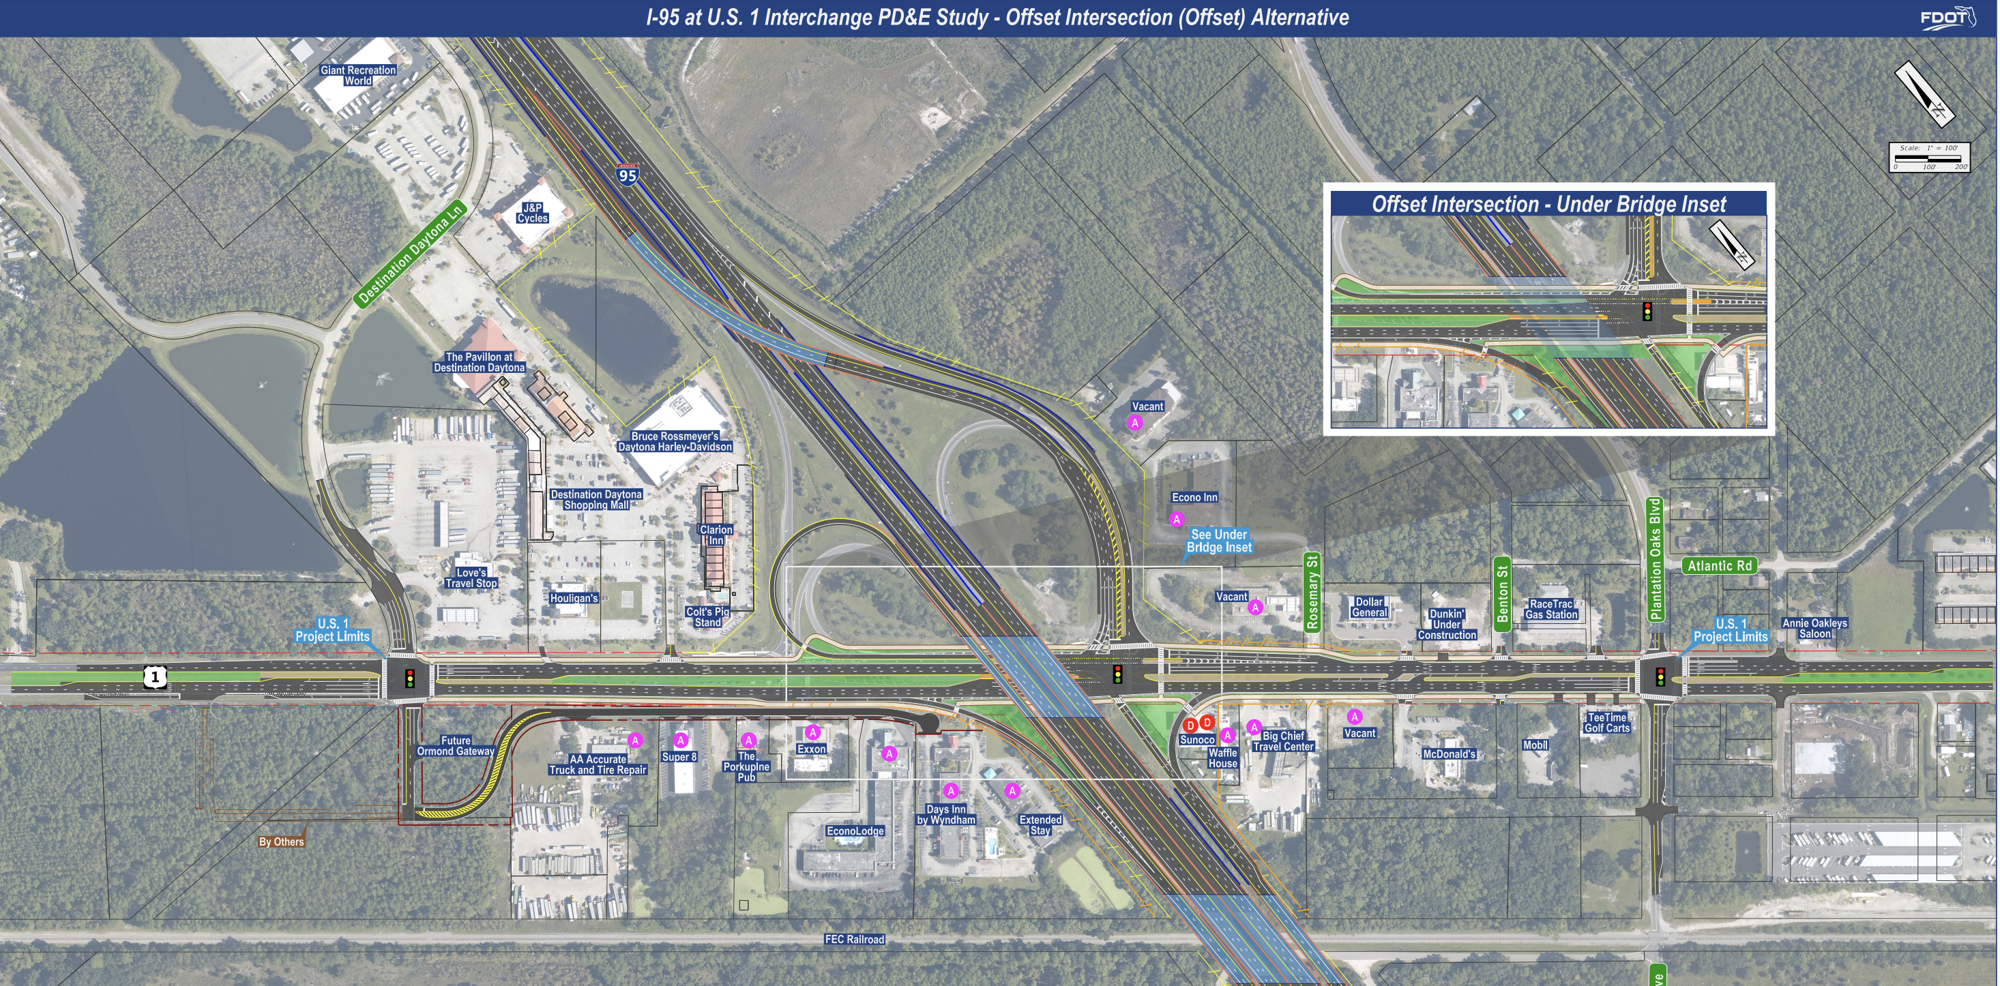 A map showing what the offset intersection alternative would look like at the U.S. 1 and I-95 interchange. Courtesy of FDOT